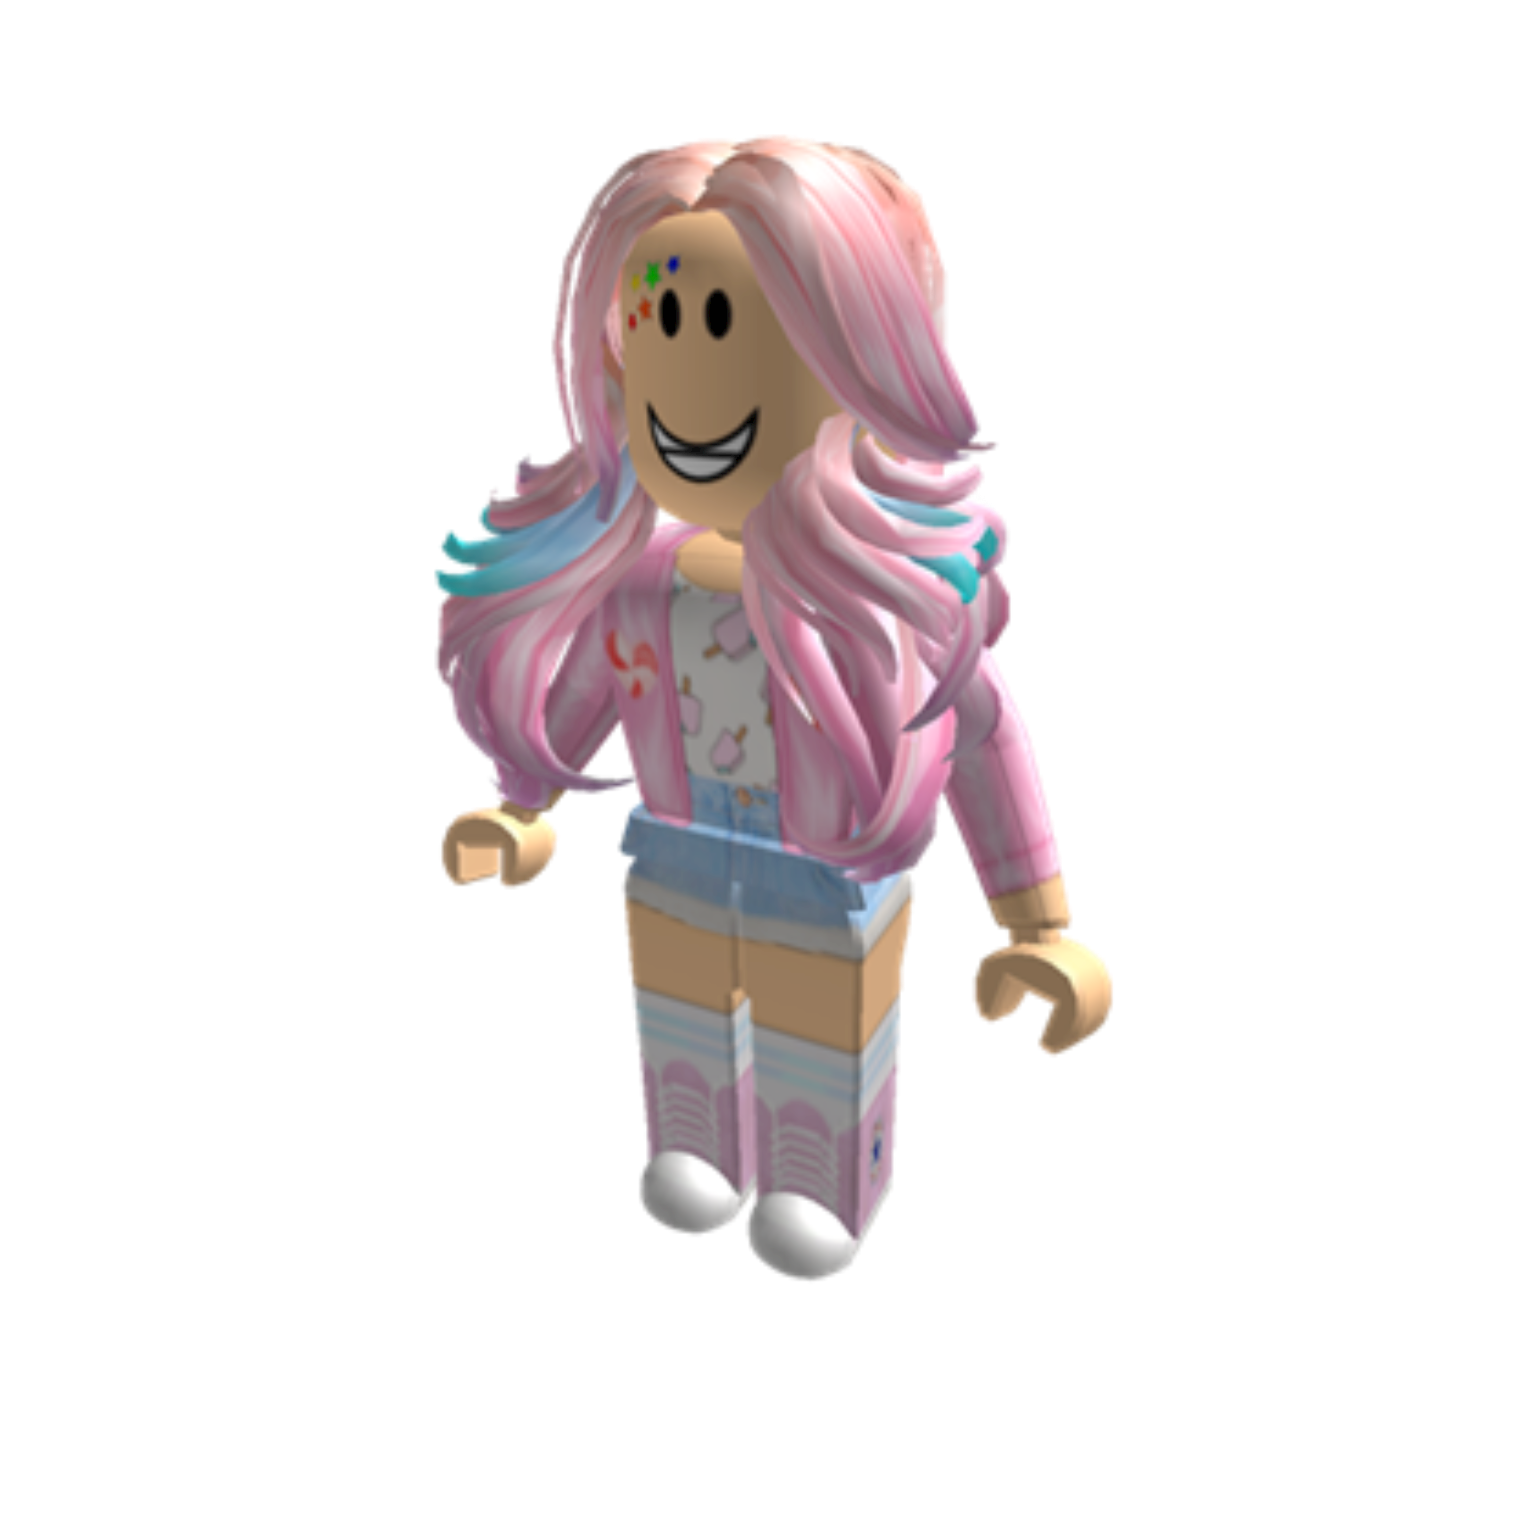 G I R L R O B L O X C H A R A C T E R Zonealarm Results - female images of roblox characters